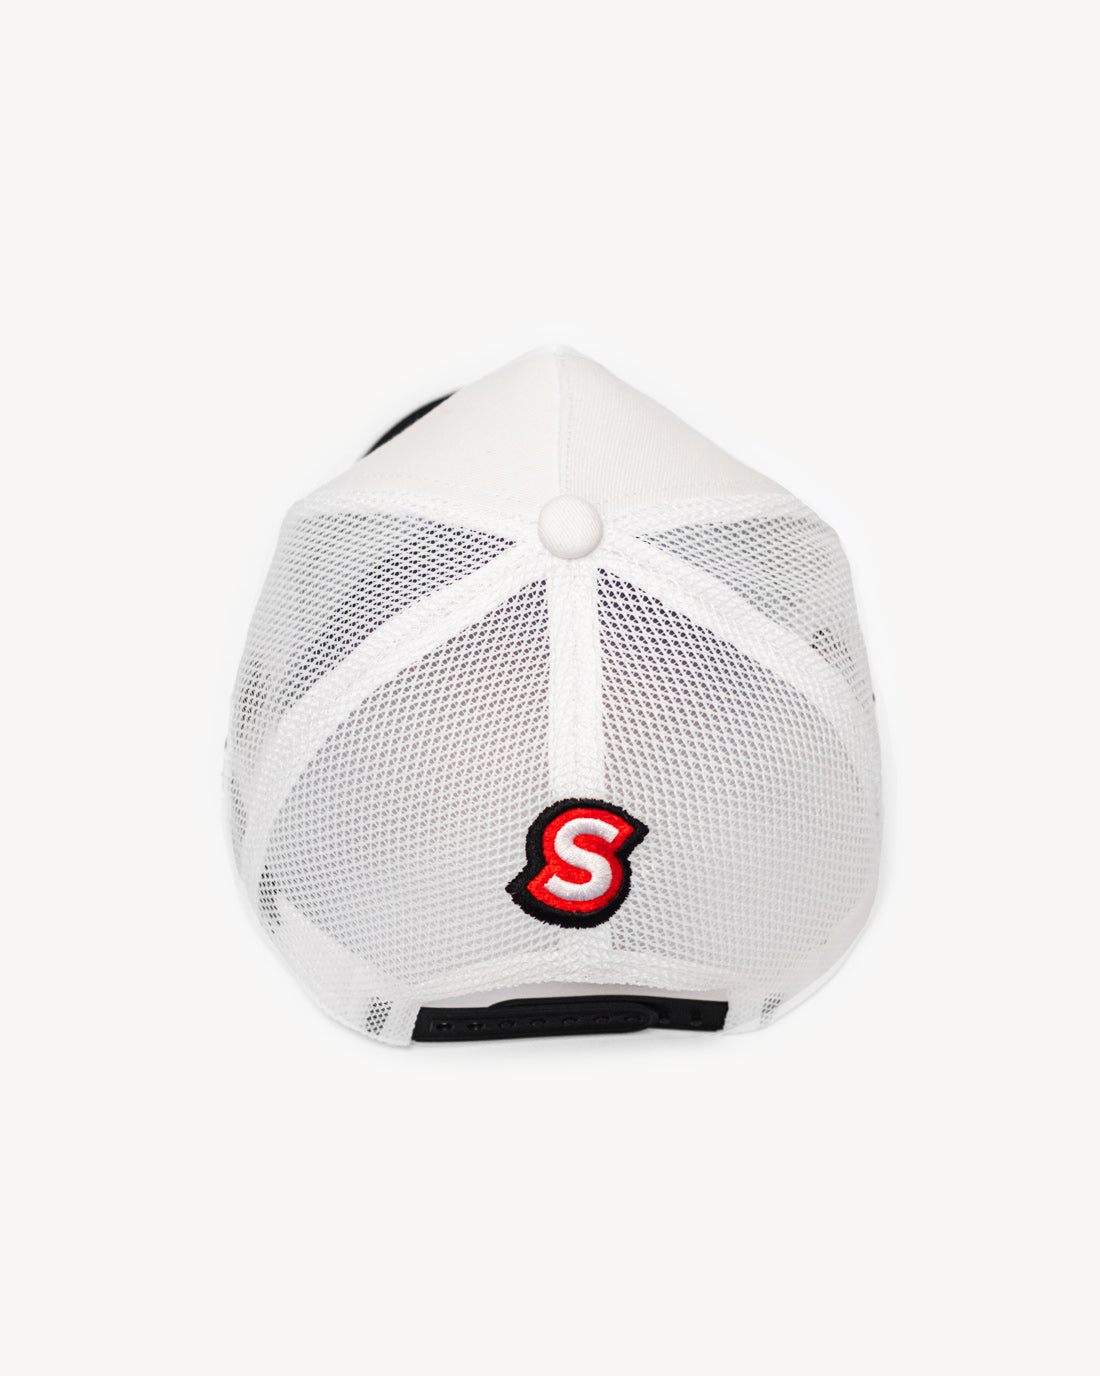 Rear view of a stylish two-toned white and black snapback hat showcasing cooling and trendy mesh design with vibrant racing-inspired patches.